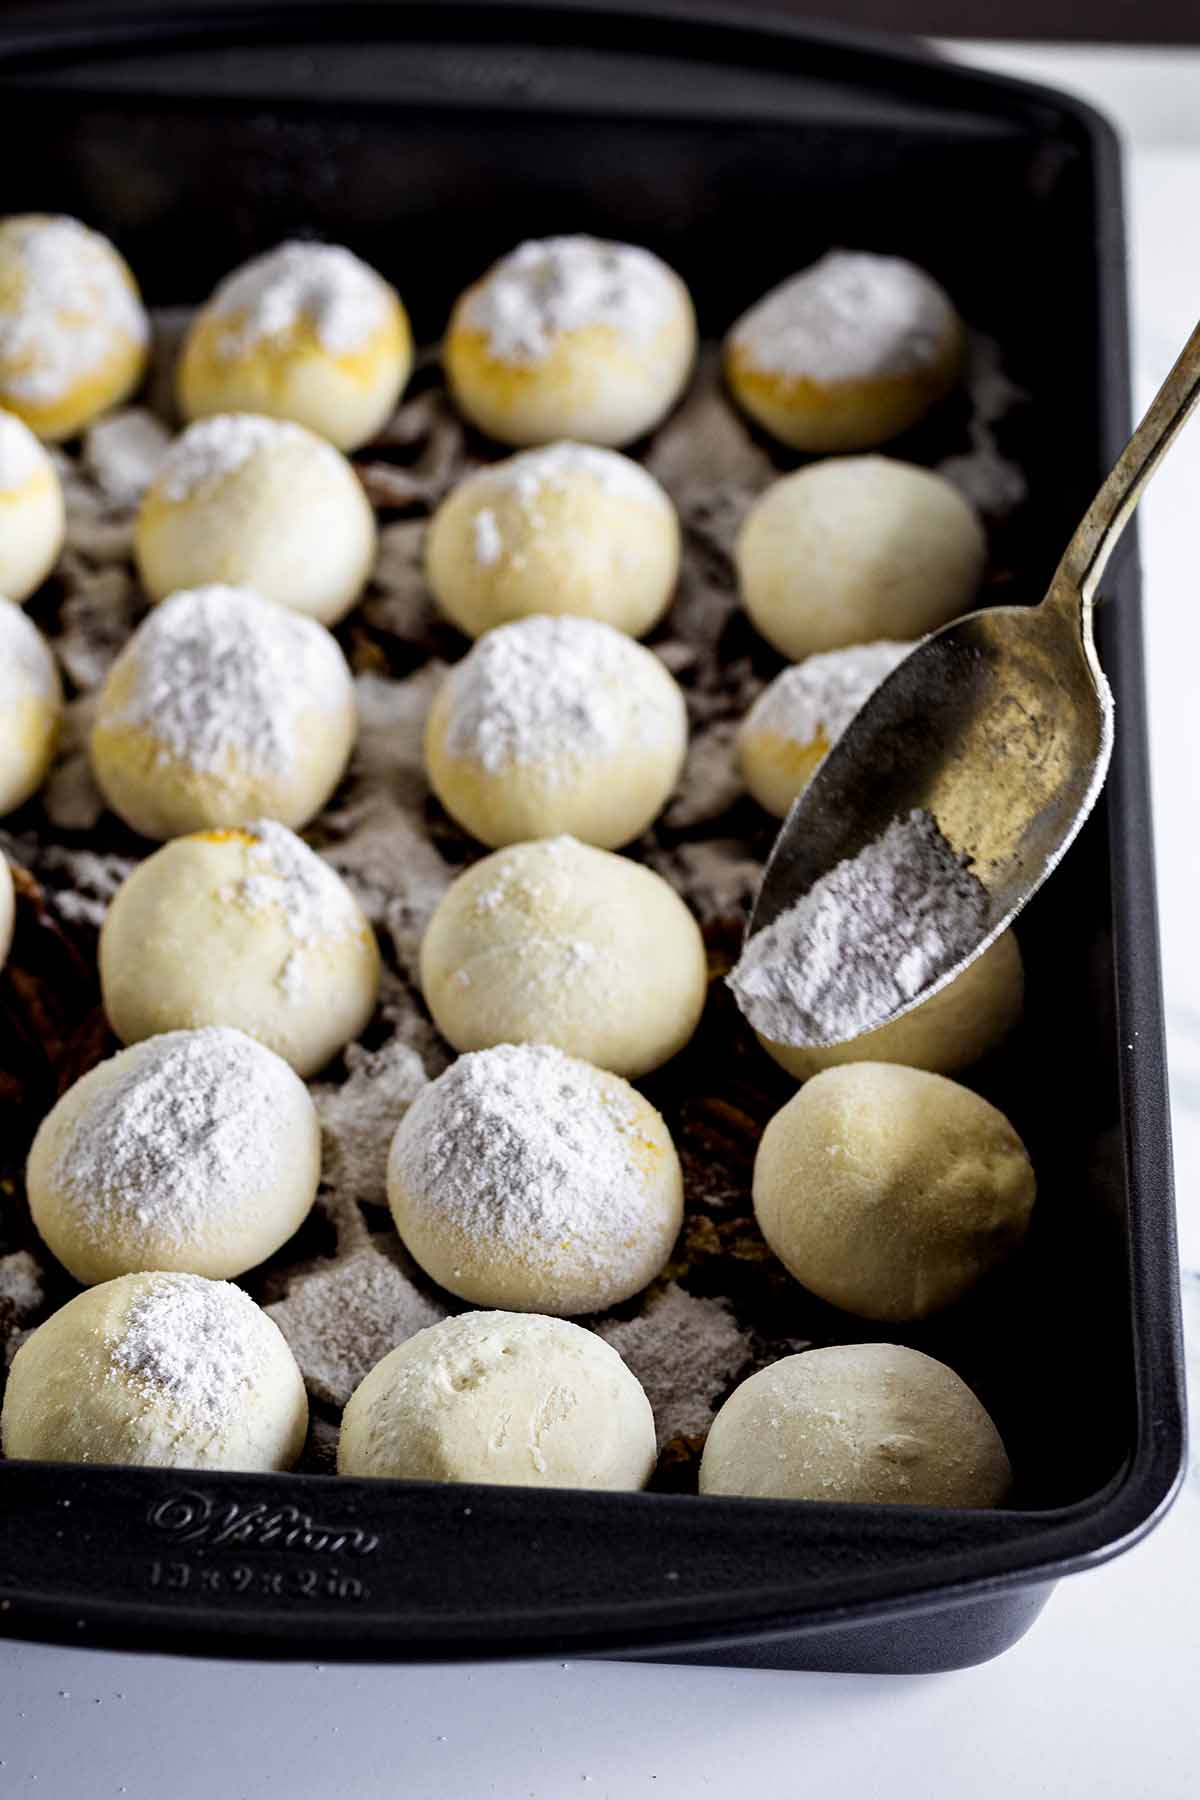 Unbaked rolls in a baking pan being sprinkled with butterscotch pudding mix